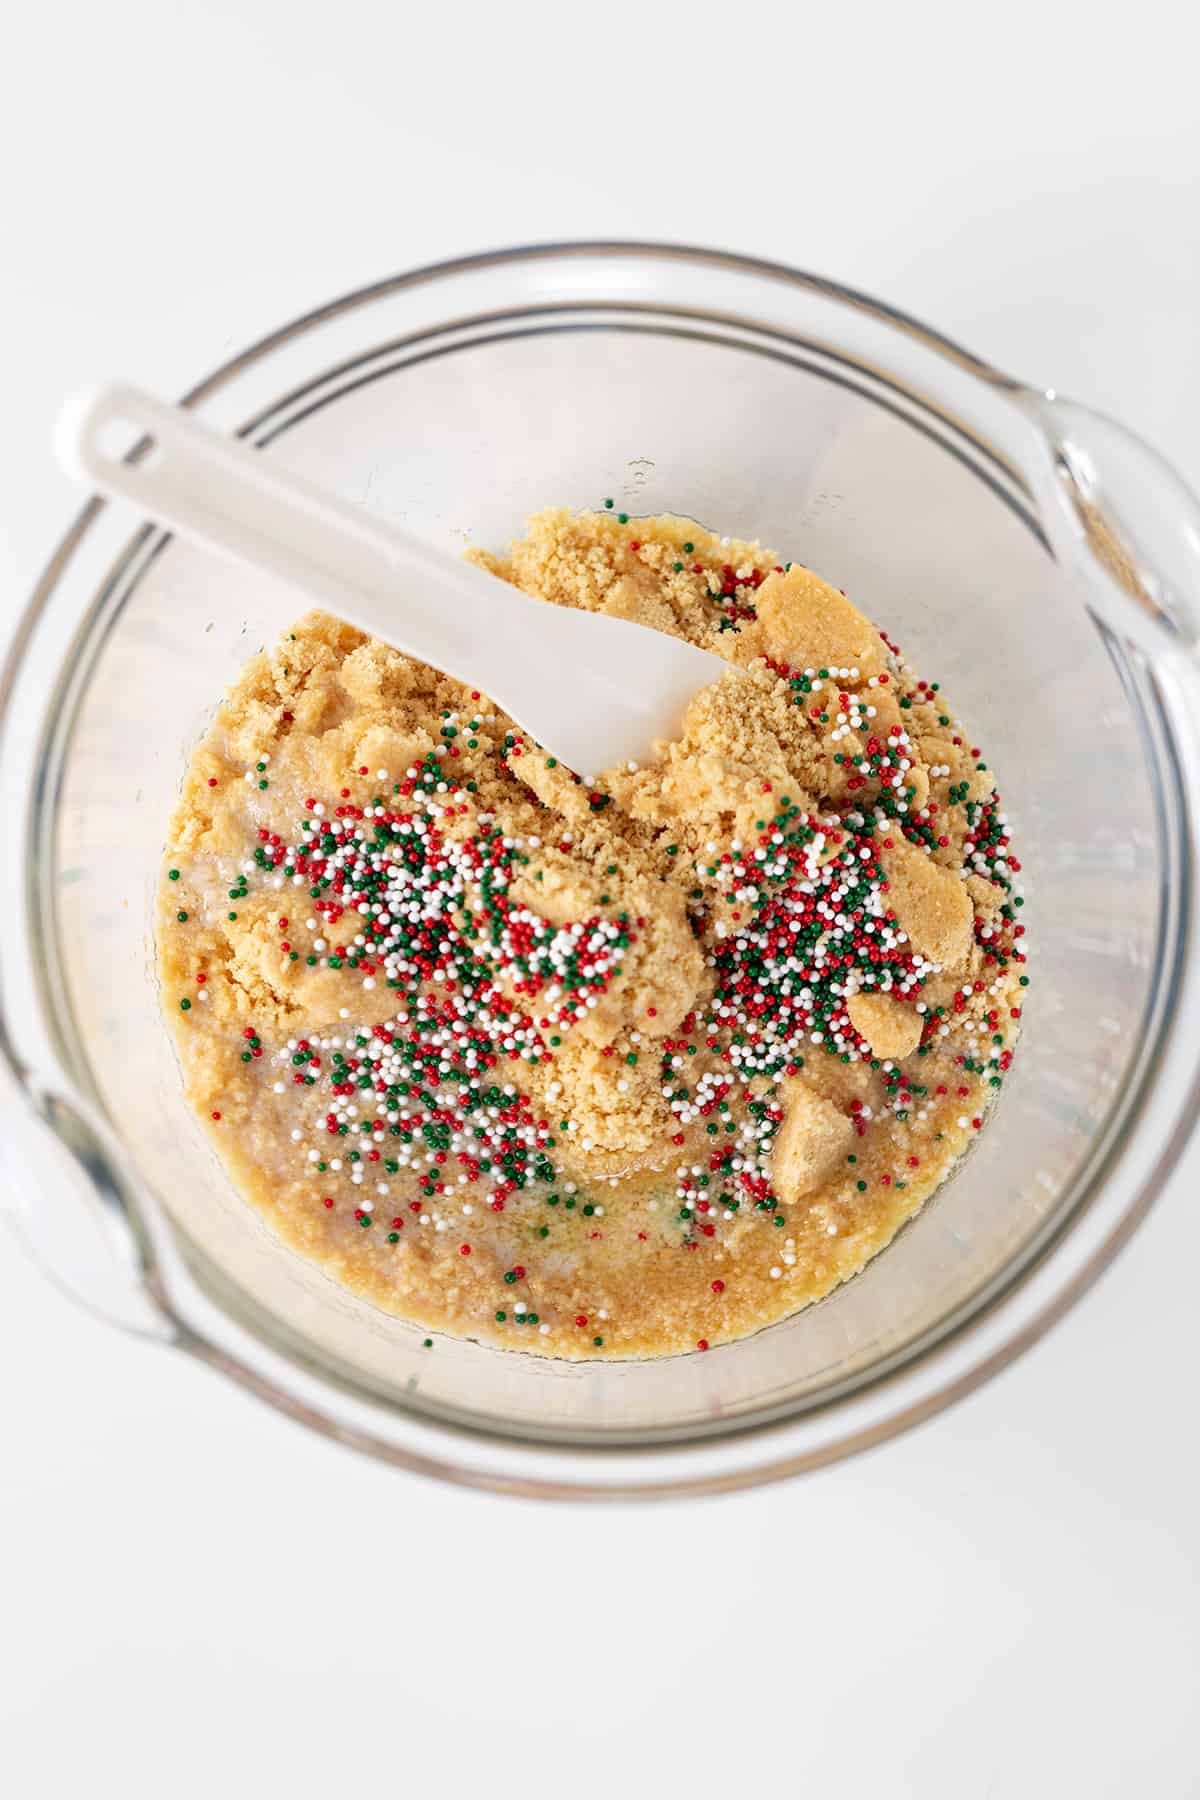 A festive bowl of cookie dough with colorful sprinkles reminiscent of Little Debbie's Christmas Tree Cheesecake.